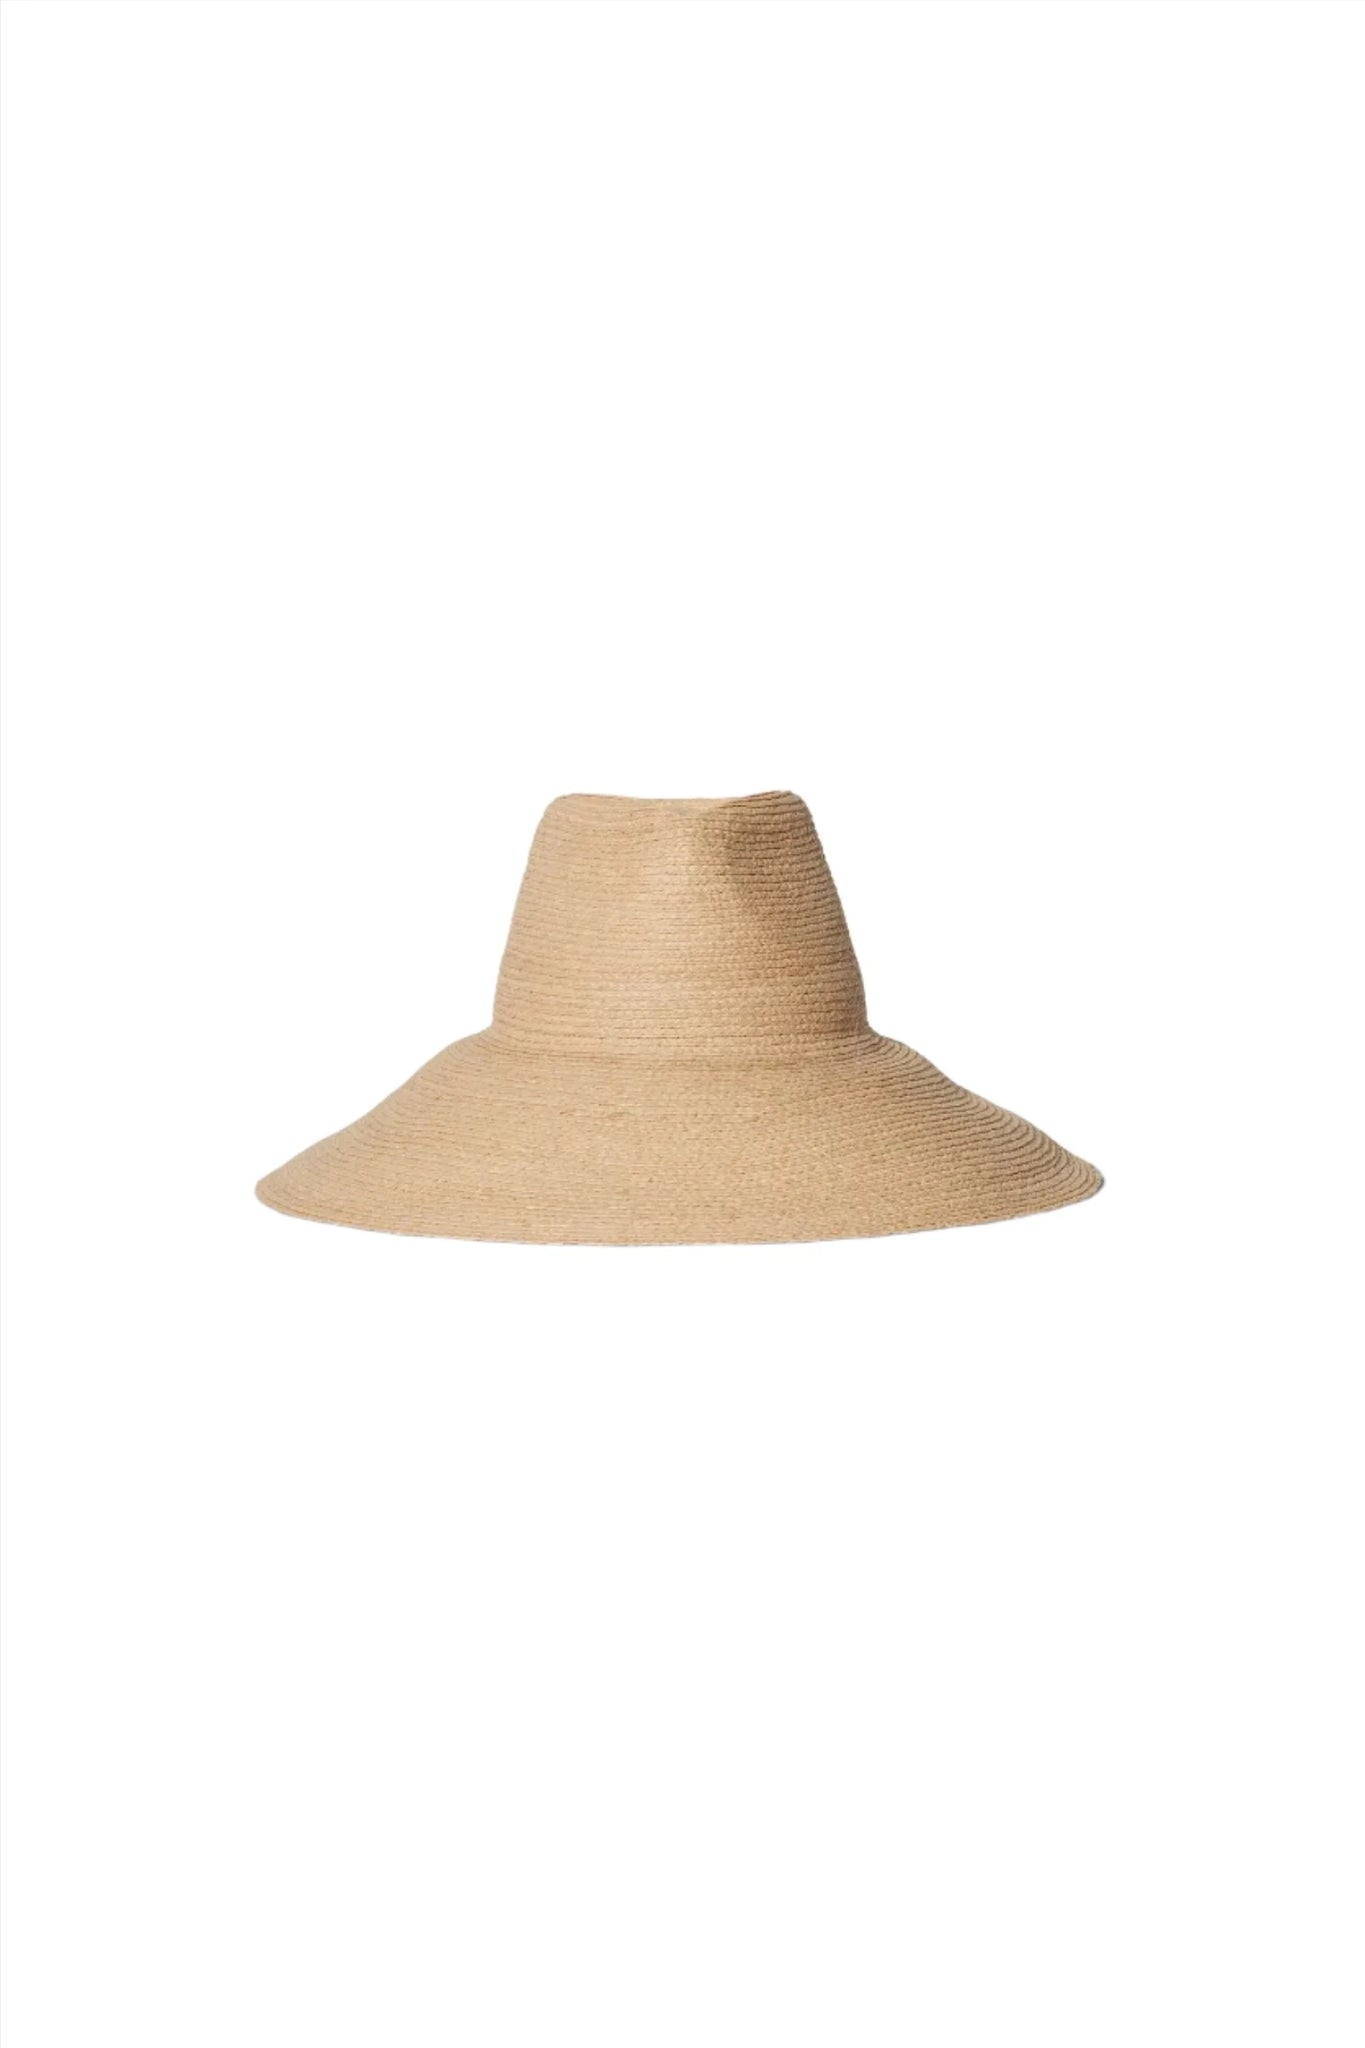 Tinsely Straw Hat in Natural